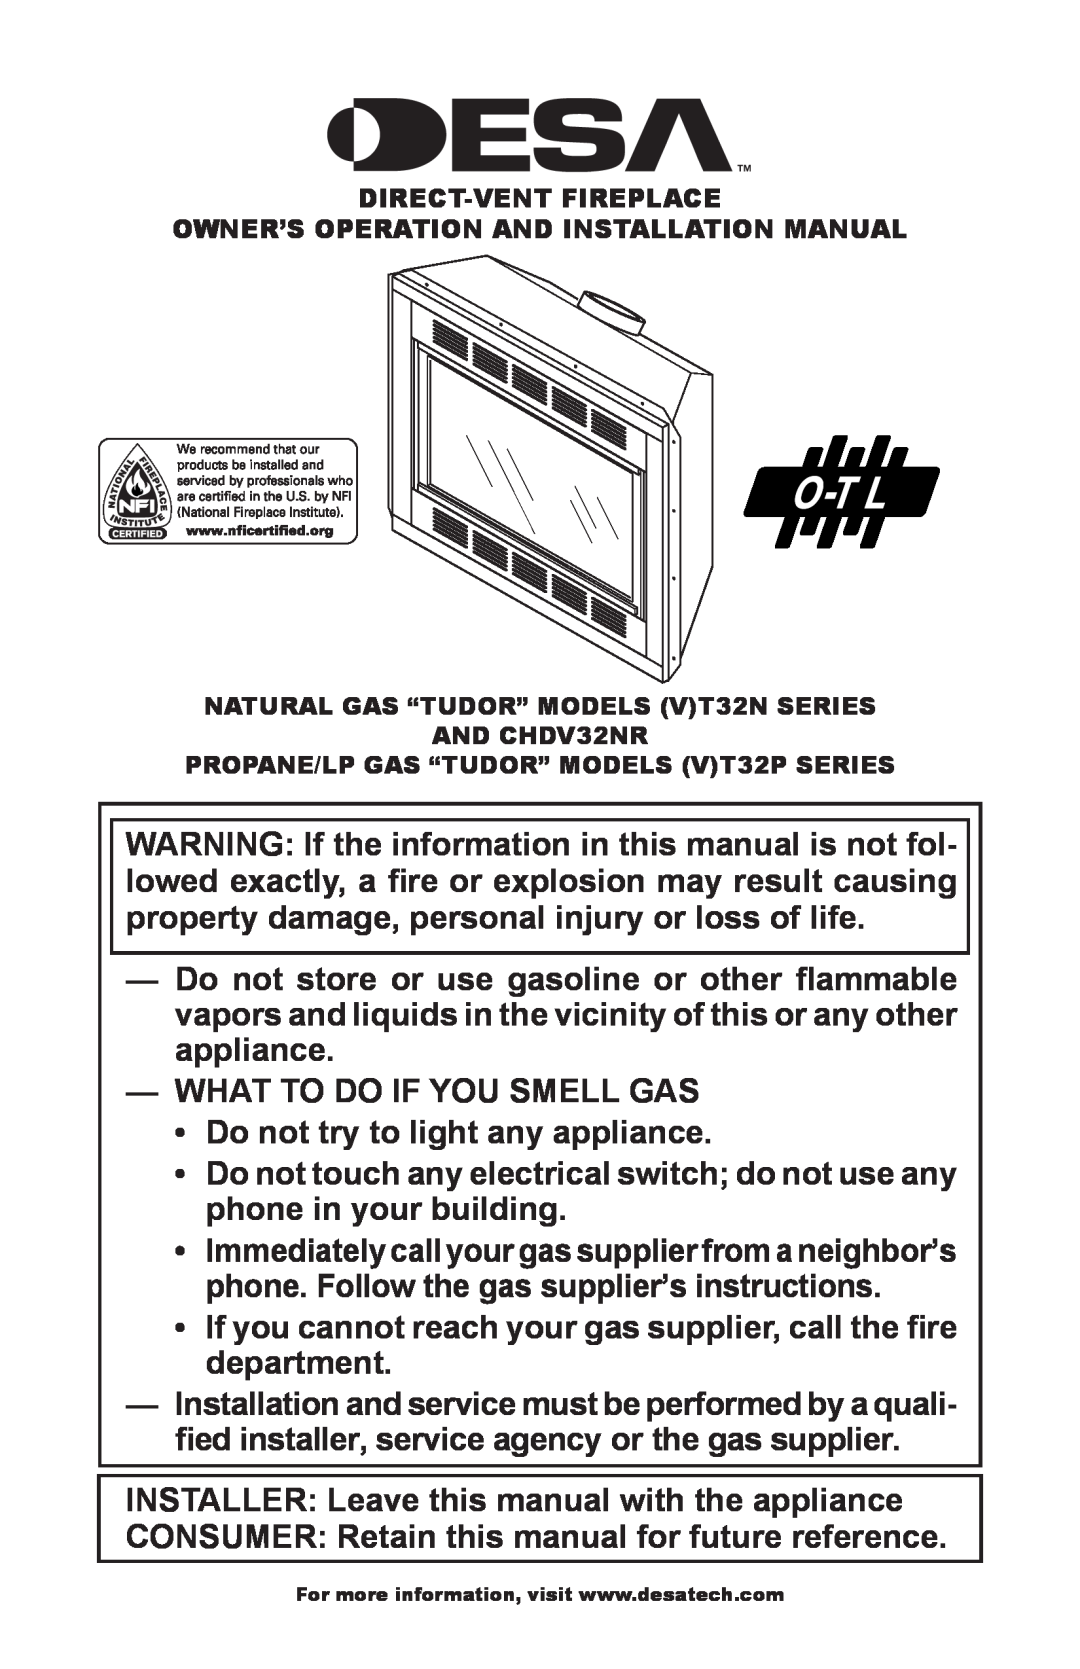 Desa (V)T32P SERIES, (V)T32N SERIES installation manual What To Do If You Smell Gas 